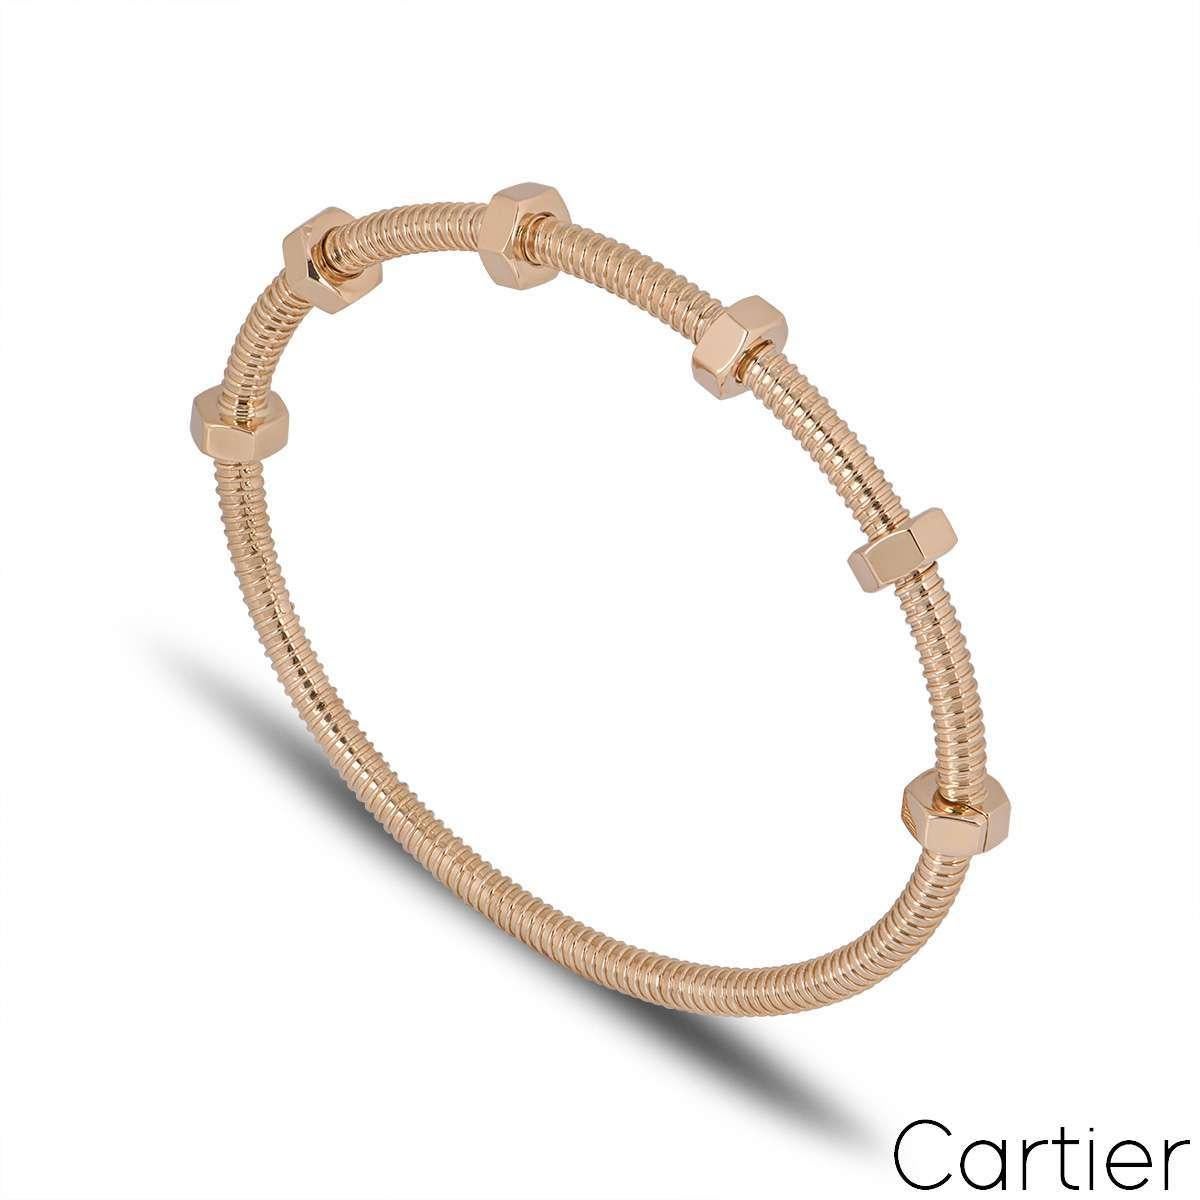 An 18k Rose gold bracelet by Cartier from the Ecrou De Cartier collection. The bracelet has a threaded design which features 6 bolts with 4 of them swivelling freely along one side of the bracelet. With a gross weight of 31.9 grams, this bracelet is